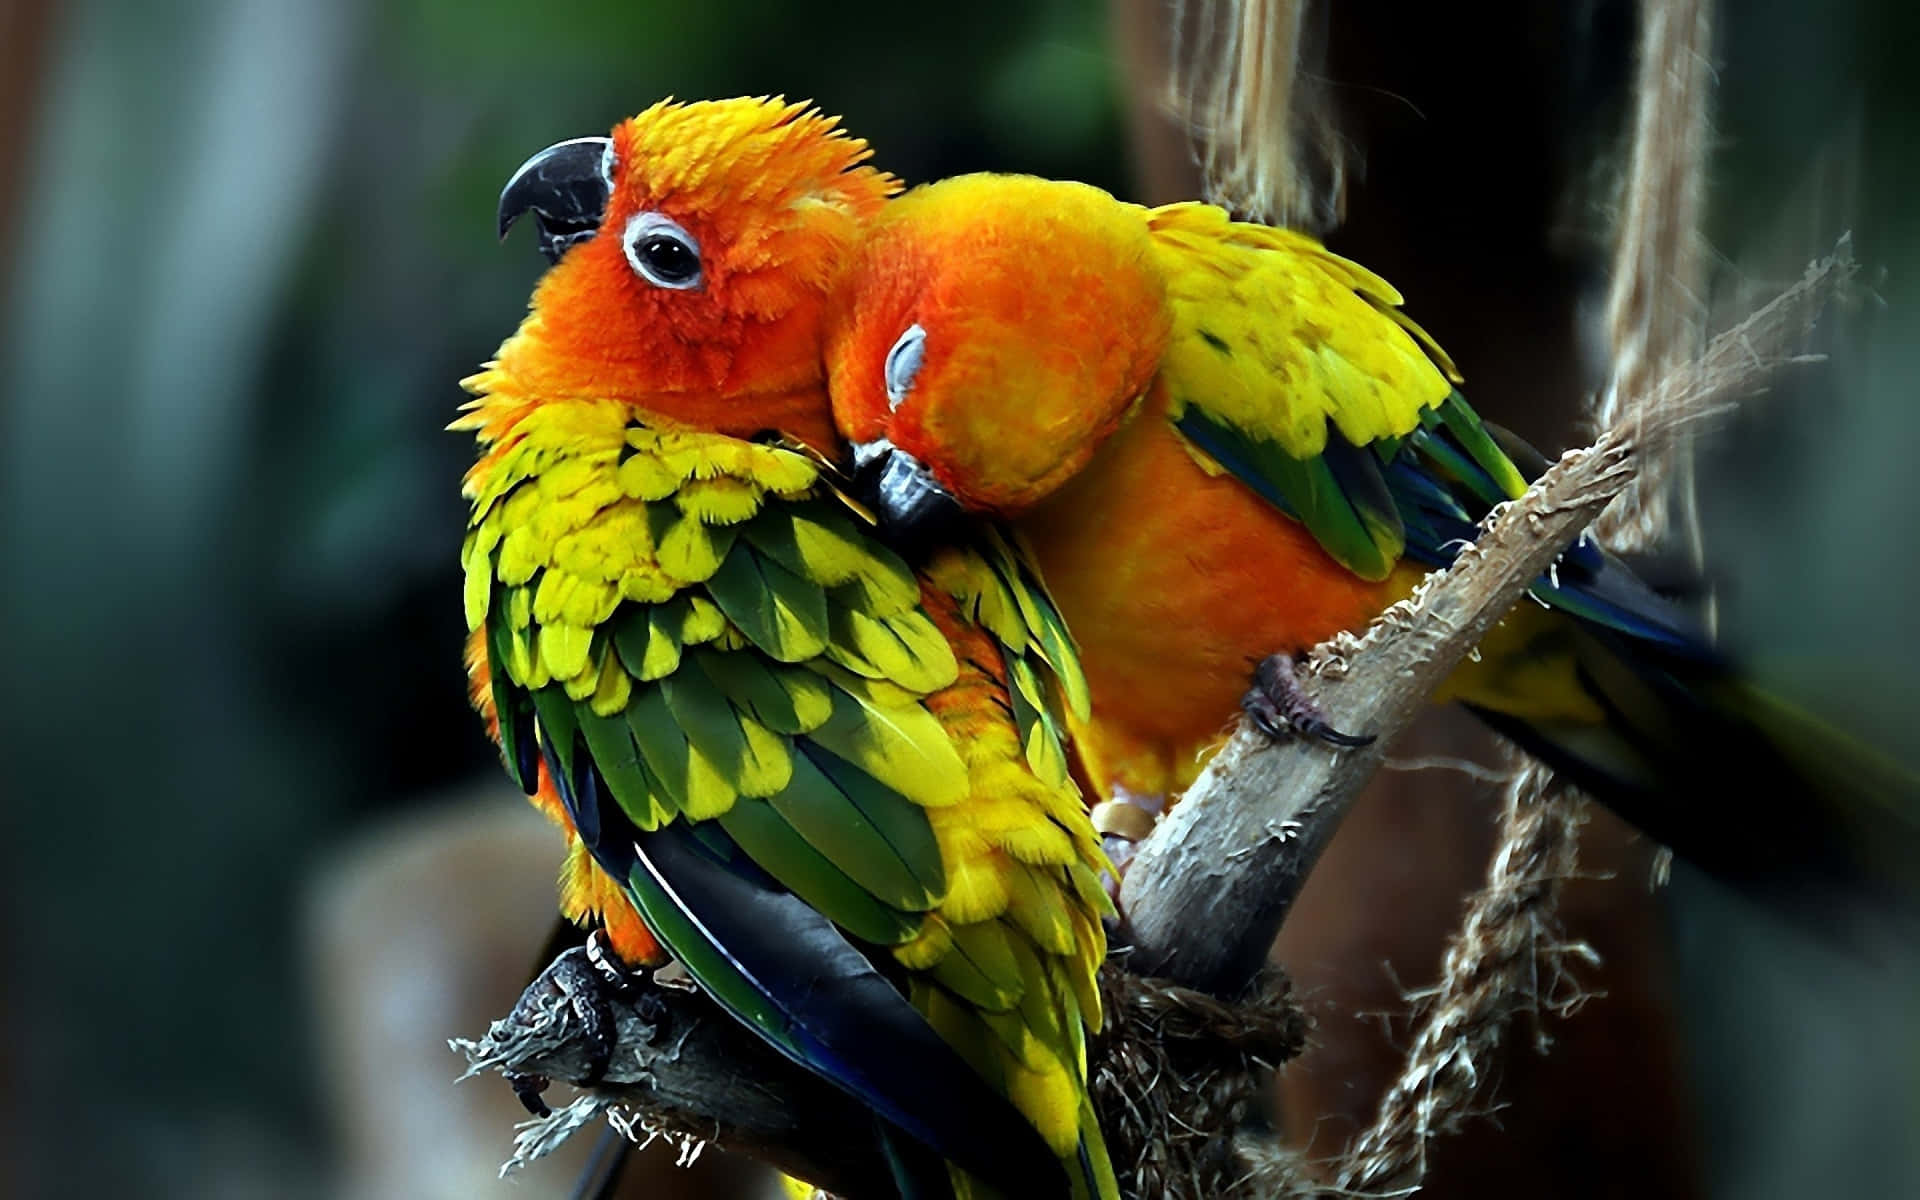 A beautiful symbol of love, represented by these two love birds!